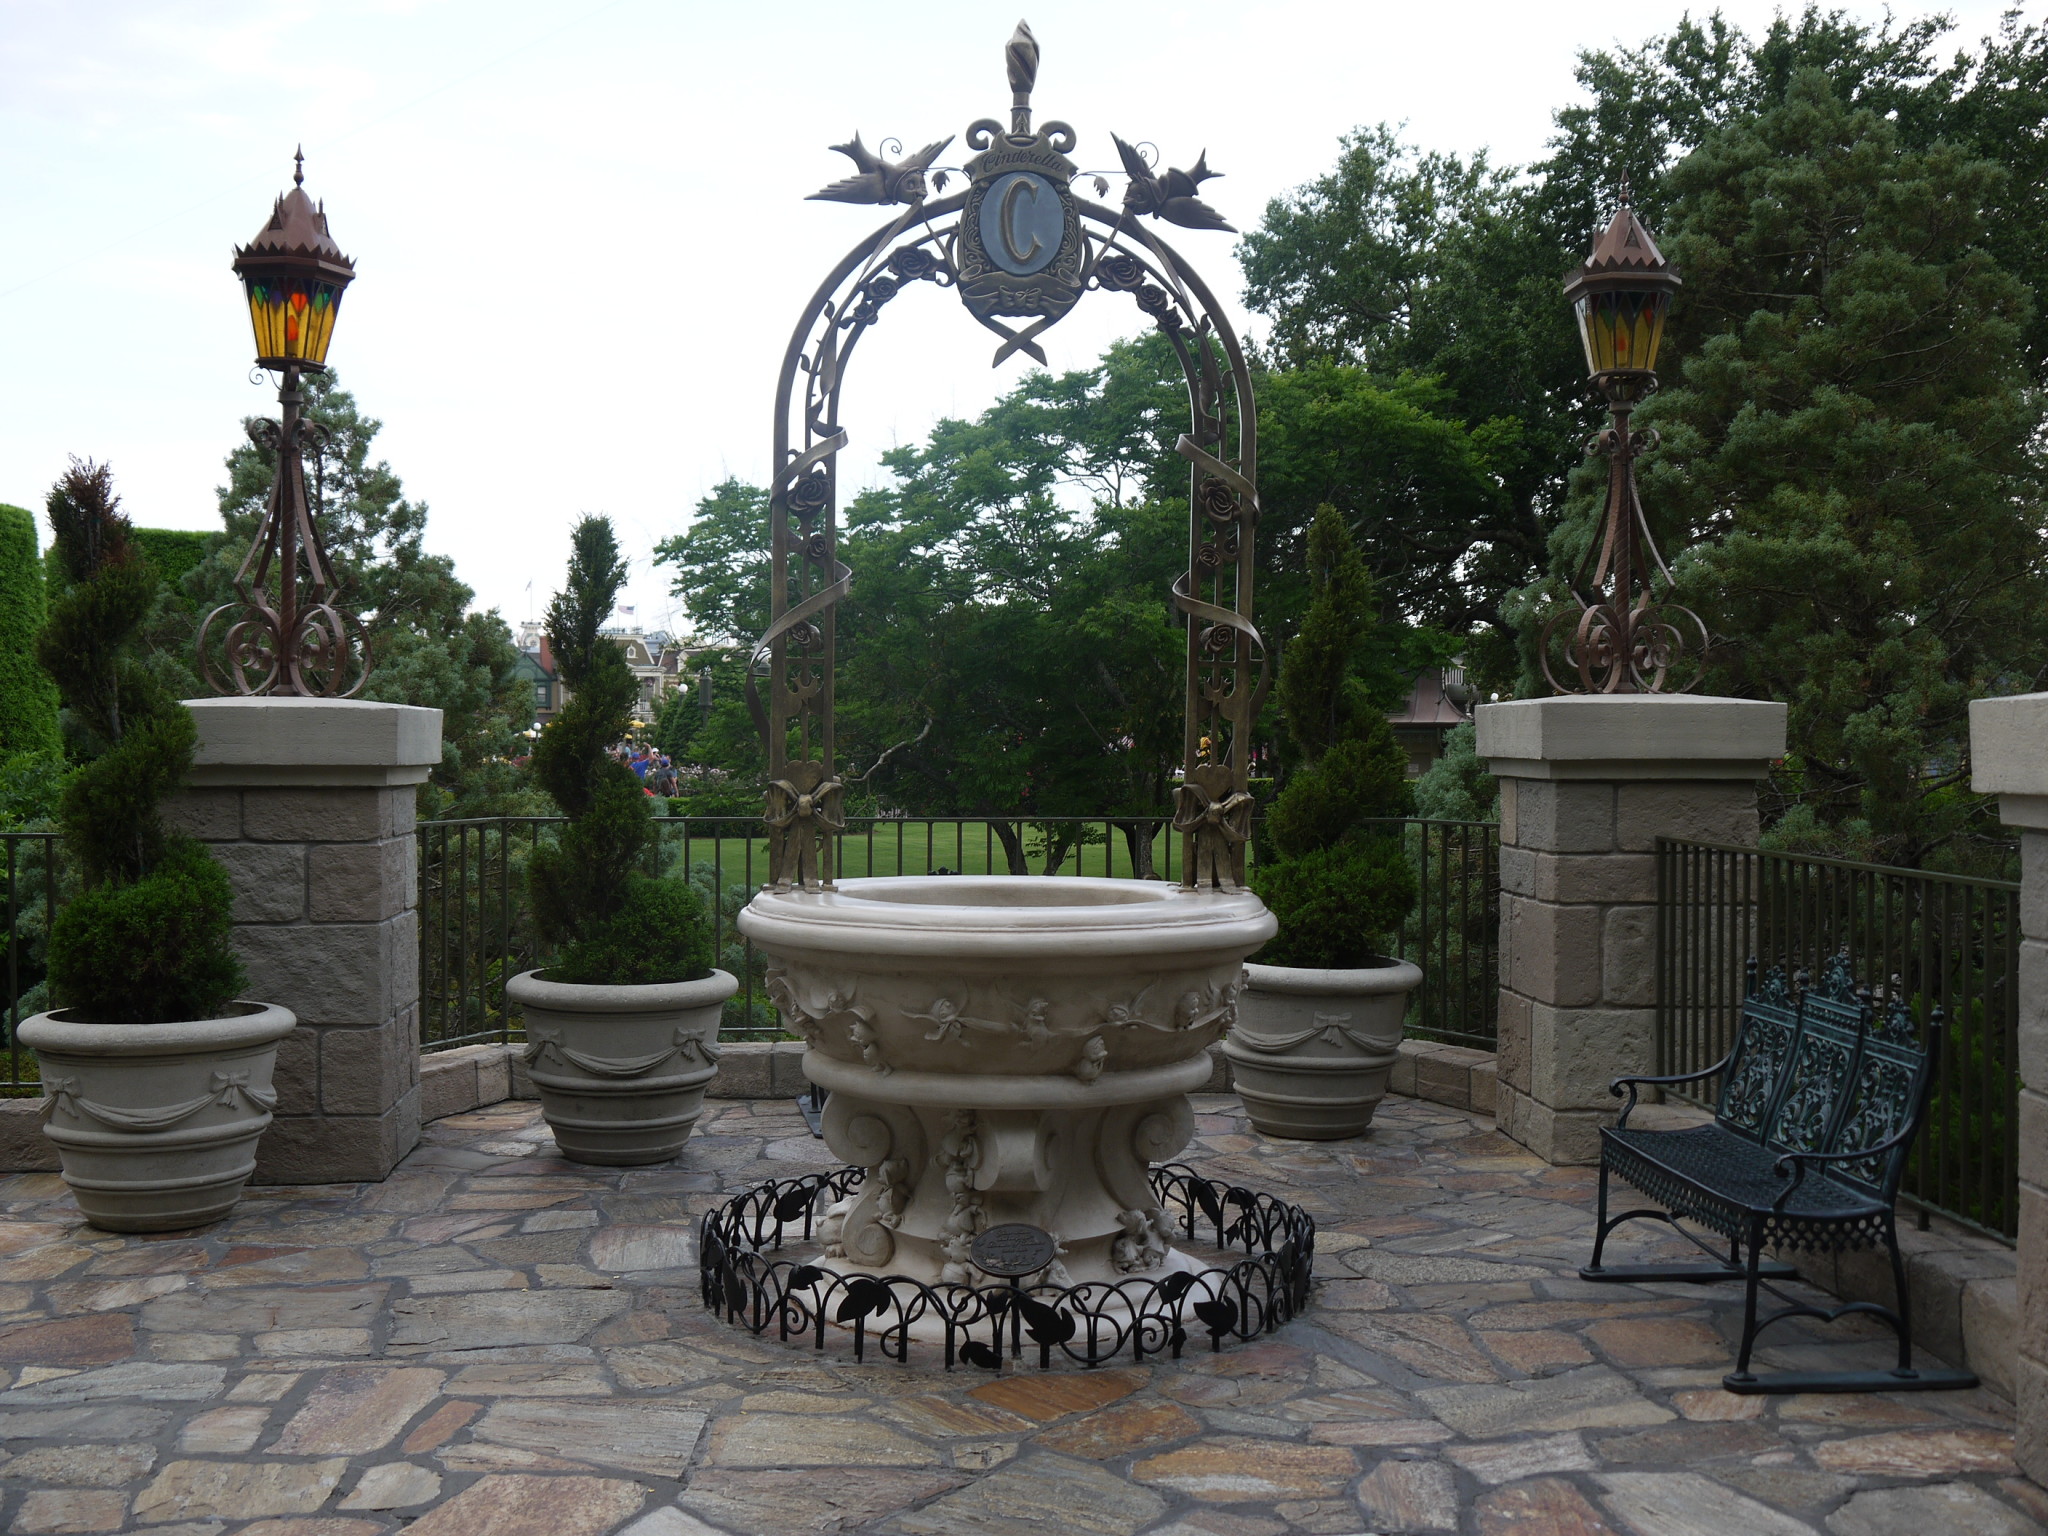 Cinderella’s Wishing Well Coins Make Wishes Come True for Florida Children